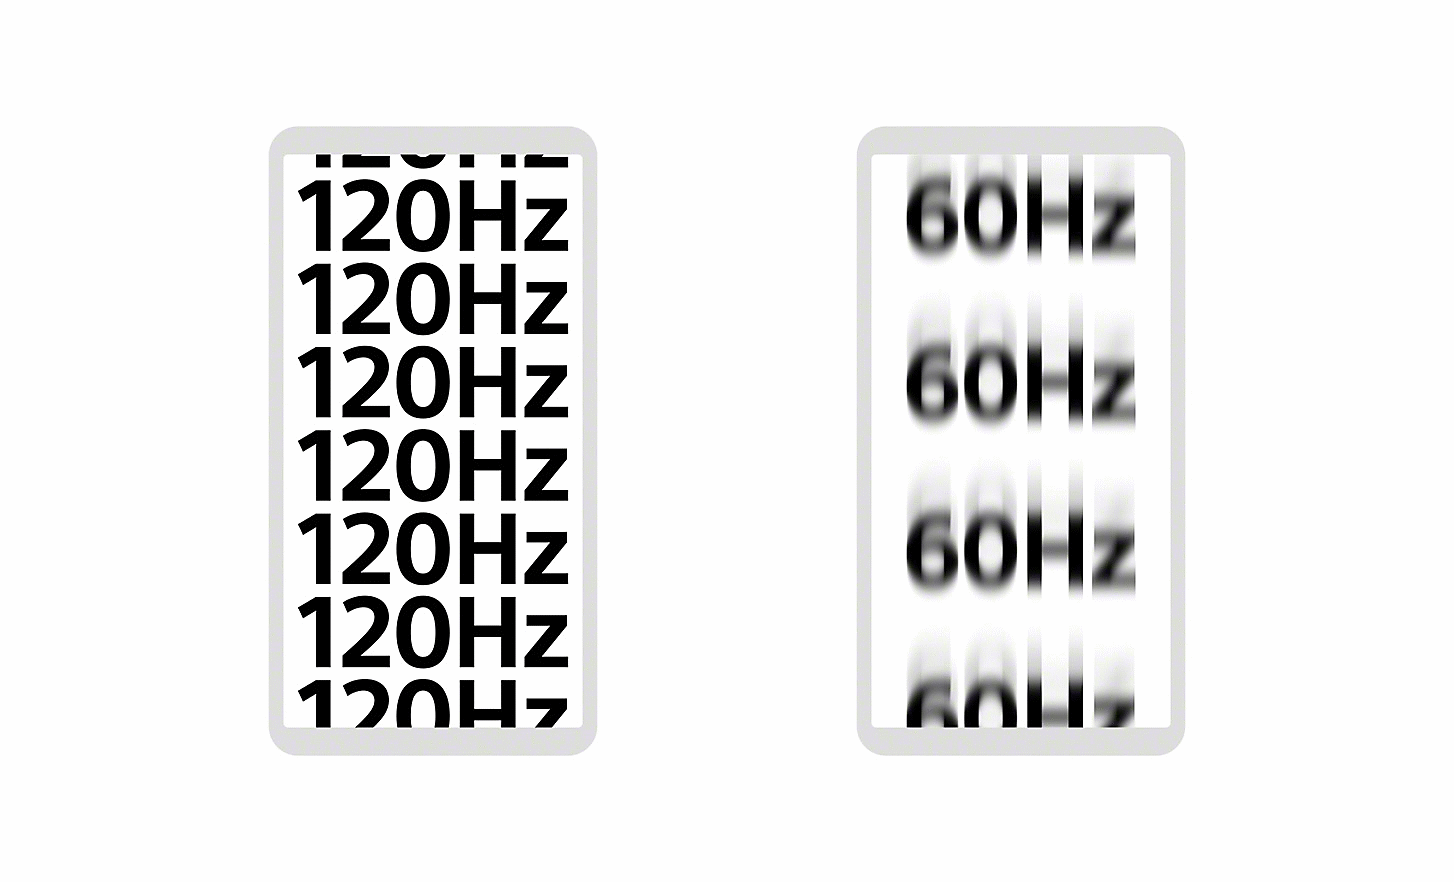 Two side-by-side boxes, the left displays many clear repetitions of 120Hz whilst the right has 4 blurry repetitions of 60Hz